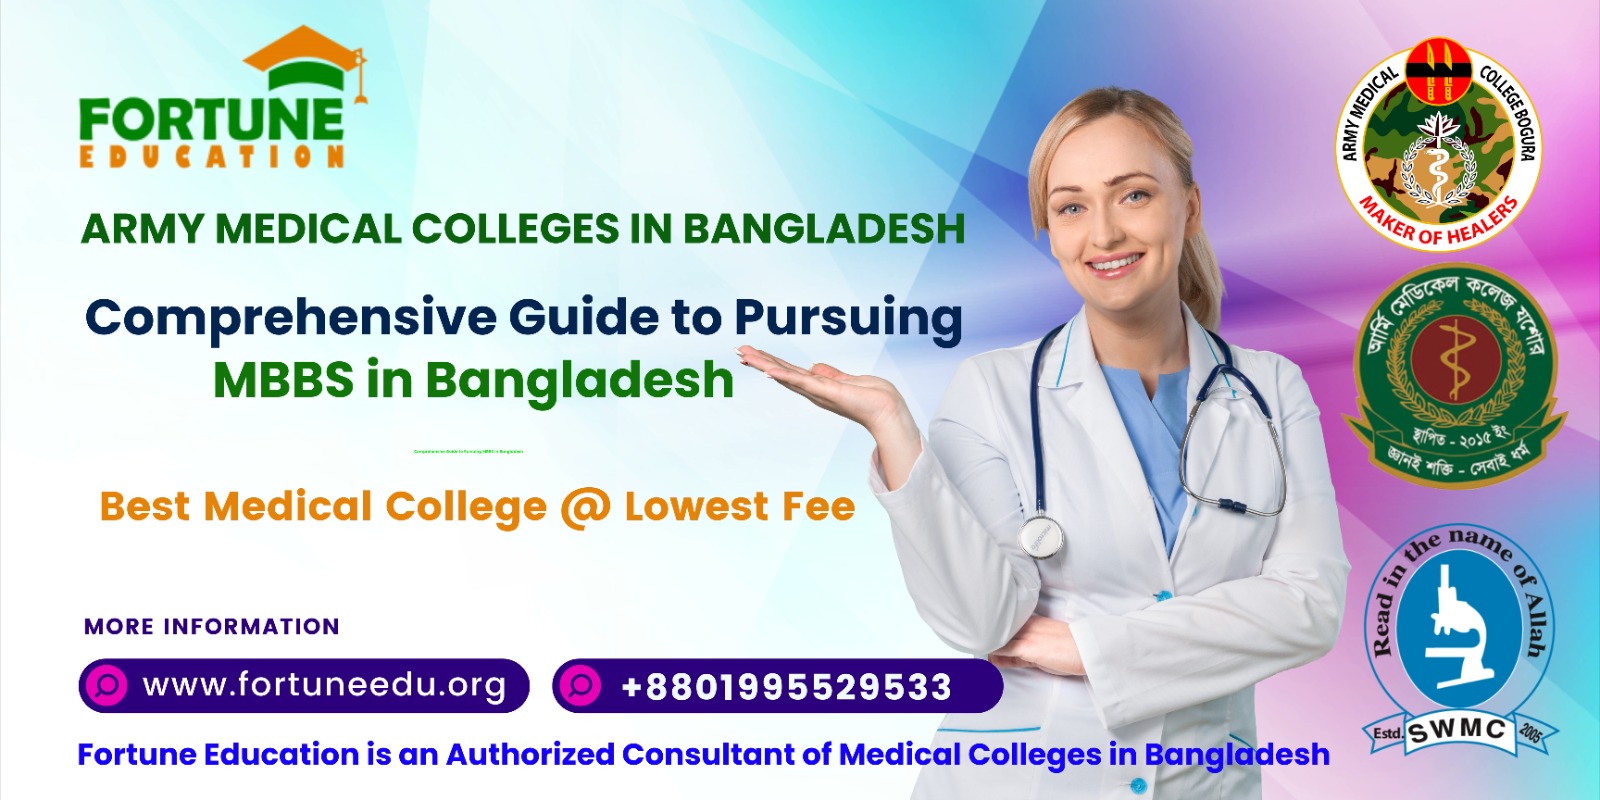 Study MBBS in Army Medical College Bogura